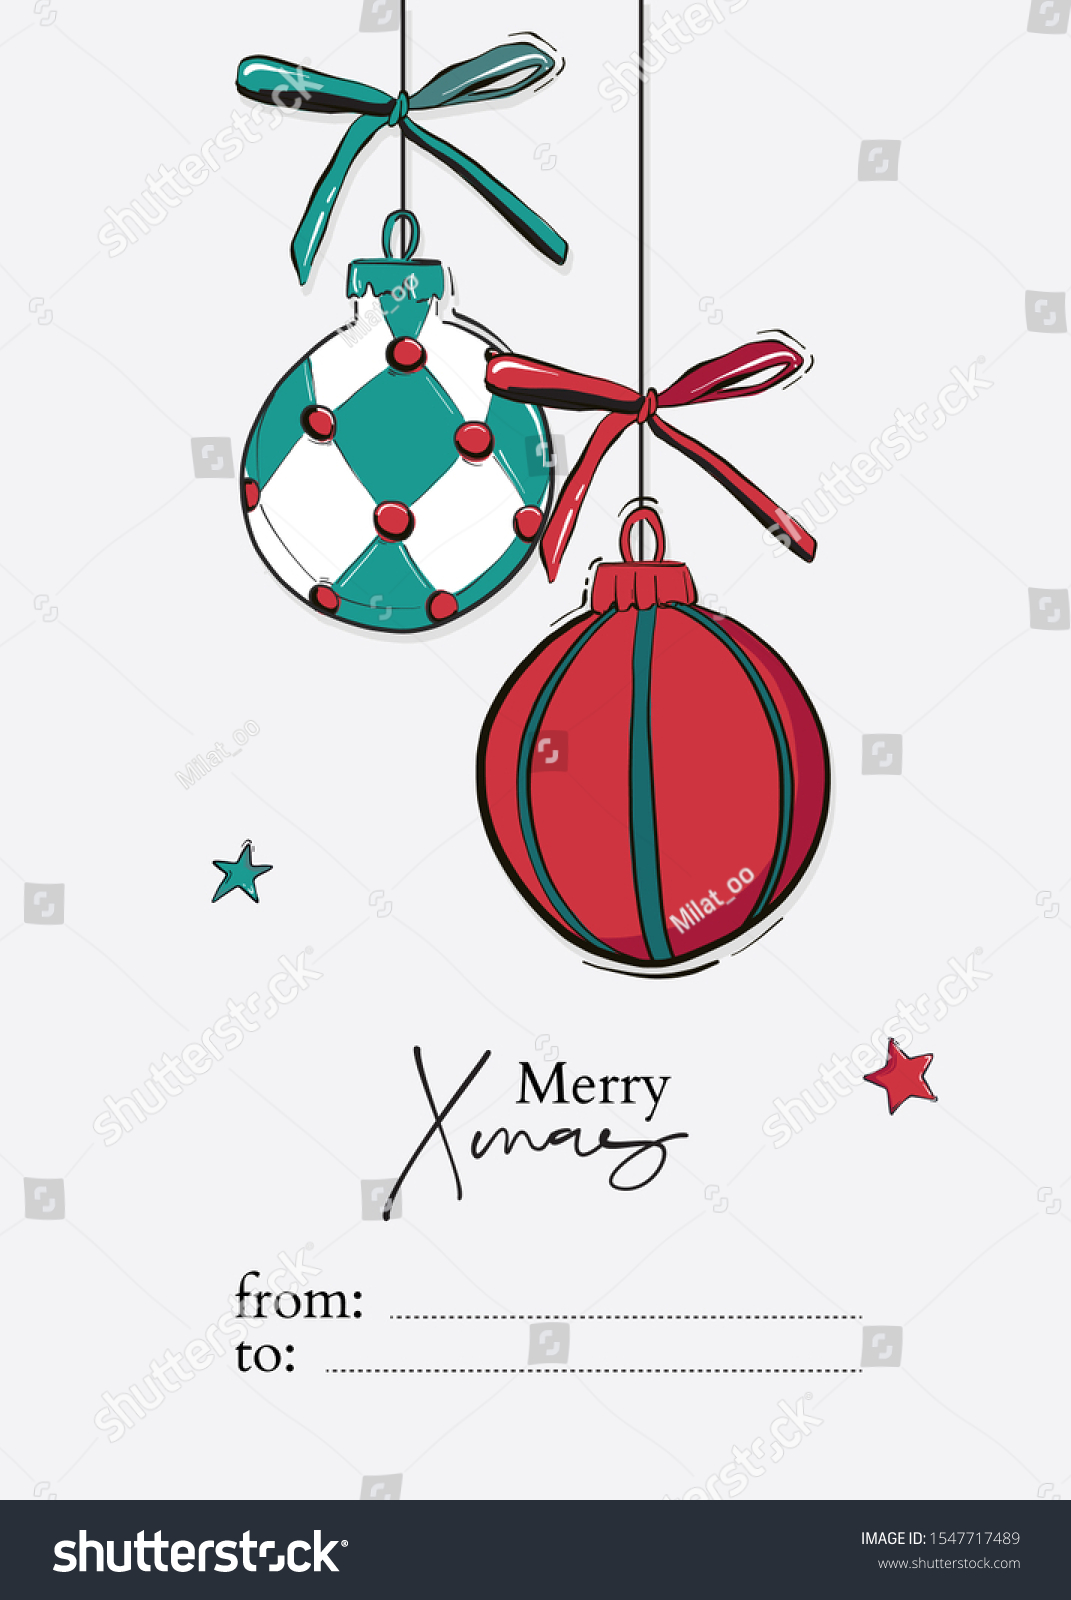 SVG of Merry Christmas hand drawn card with New Year bauble balls and stars, bows in green red traditional color. Vector sketch illustration, greeting card design svg